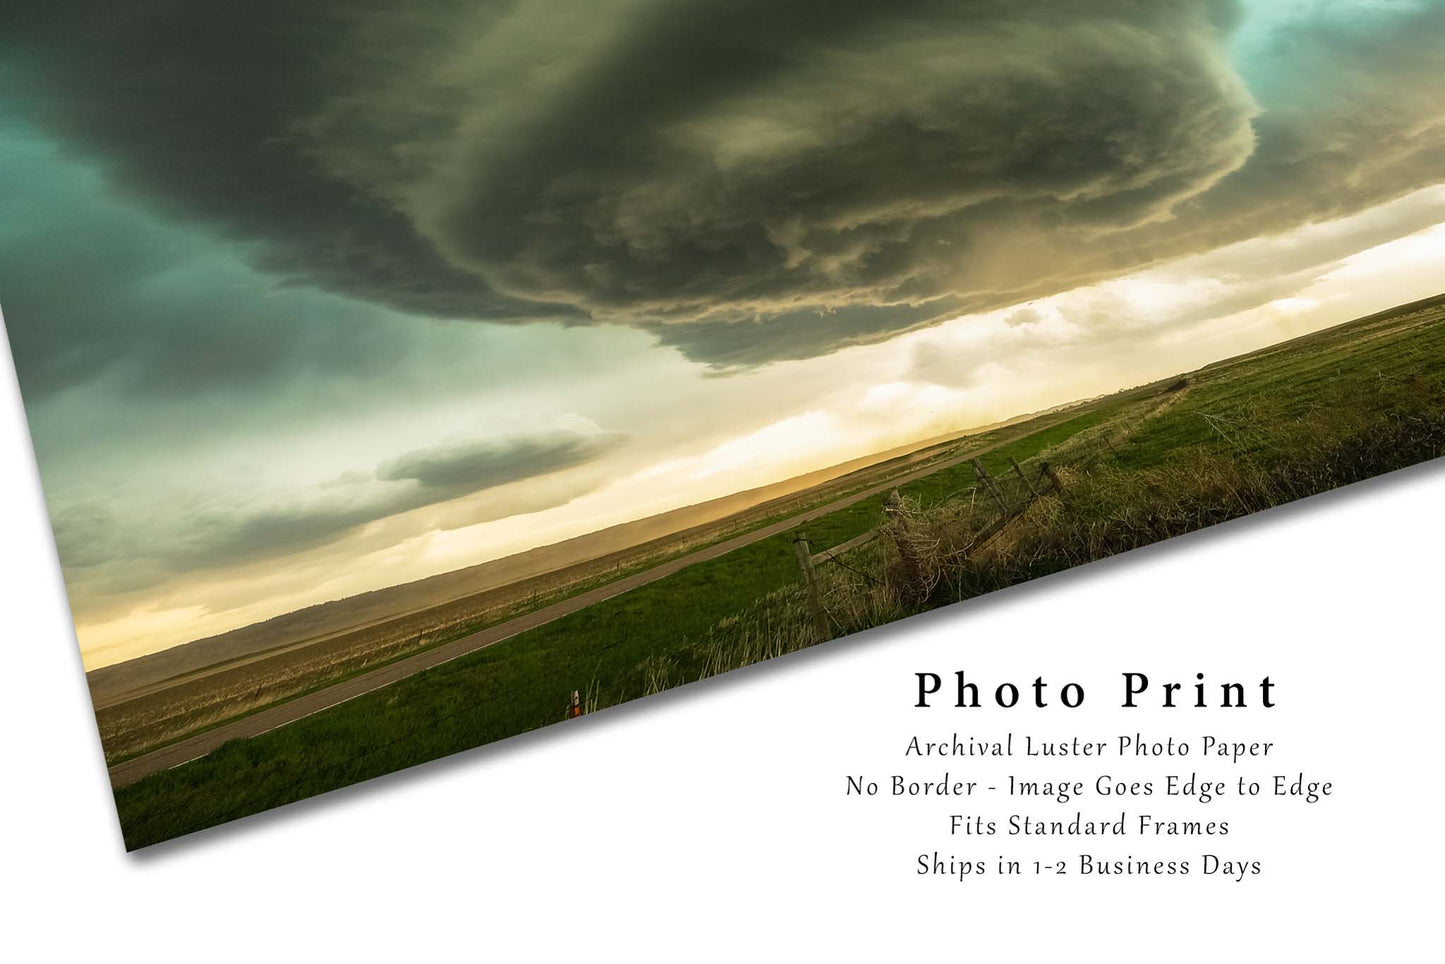 Nature Photography Print - Picture of Twisting Storm Cloud Over Open Prairie in Nebraska Weather Decor Thunderstorm Wall Art Photo Artwork